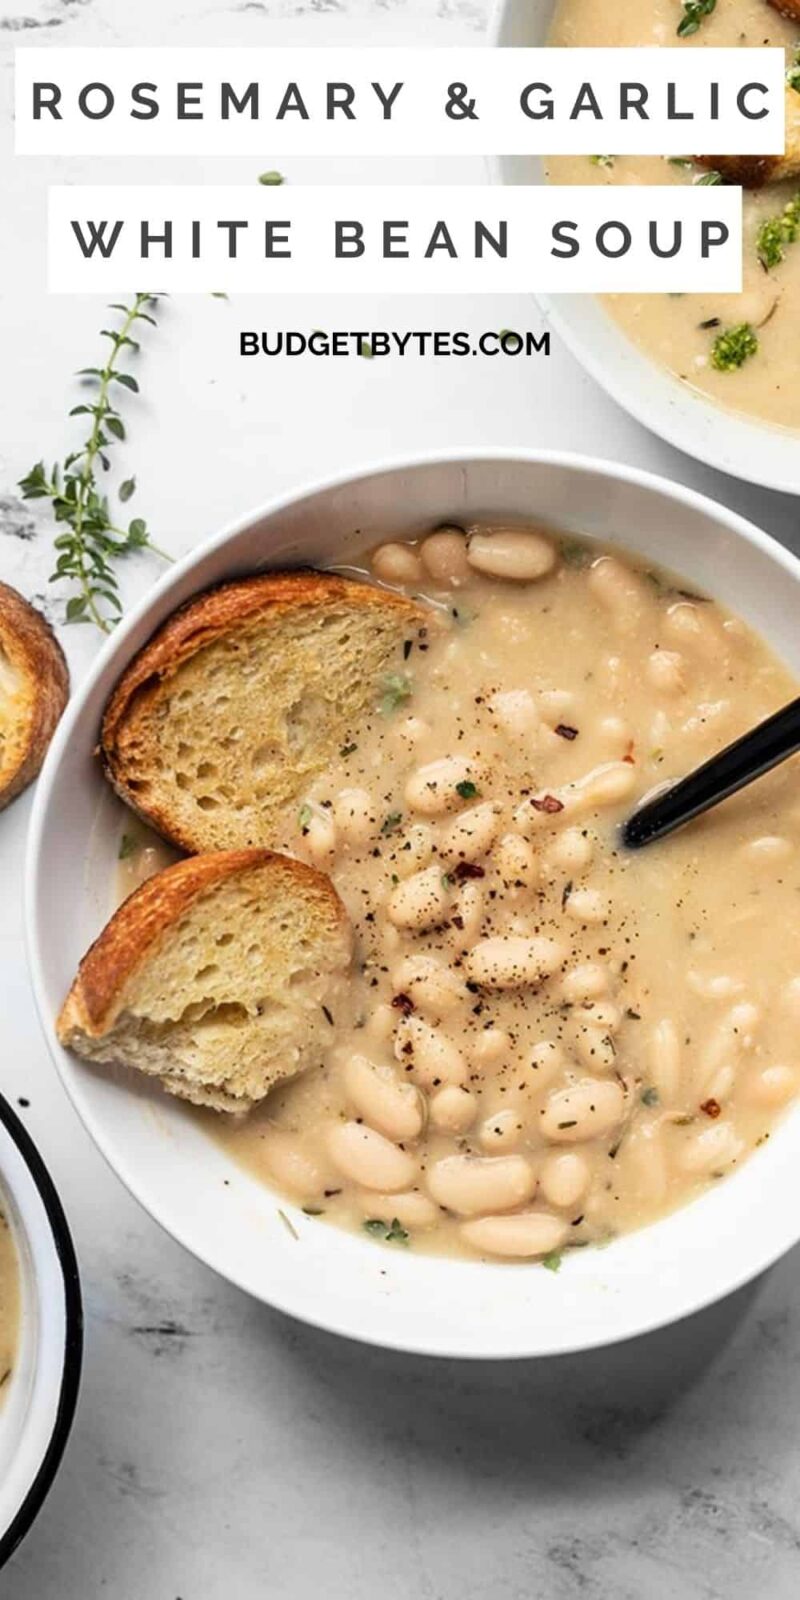 white bean soup with bread in the side of the bowl, title text at the top